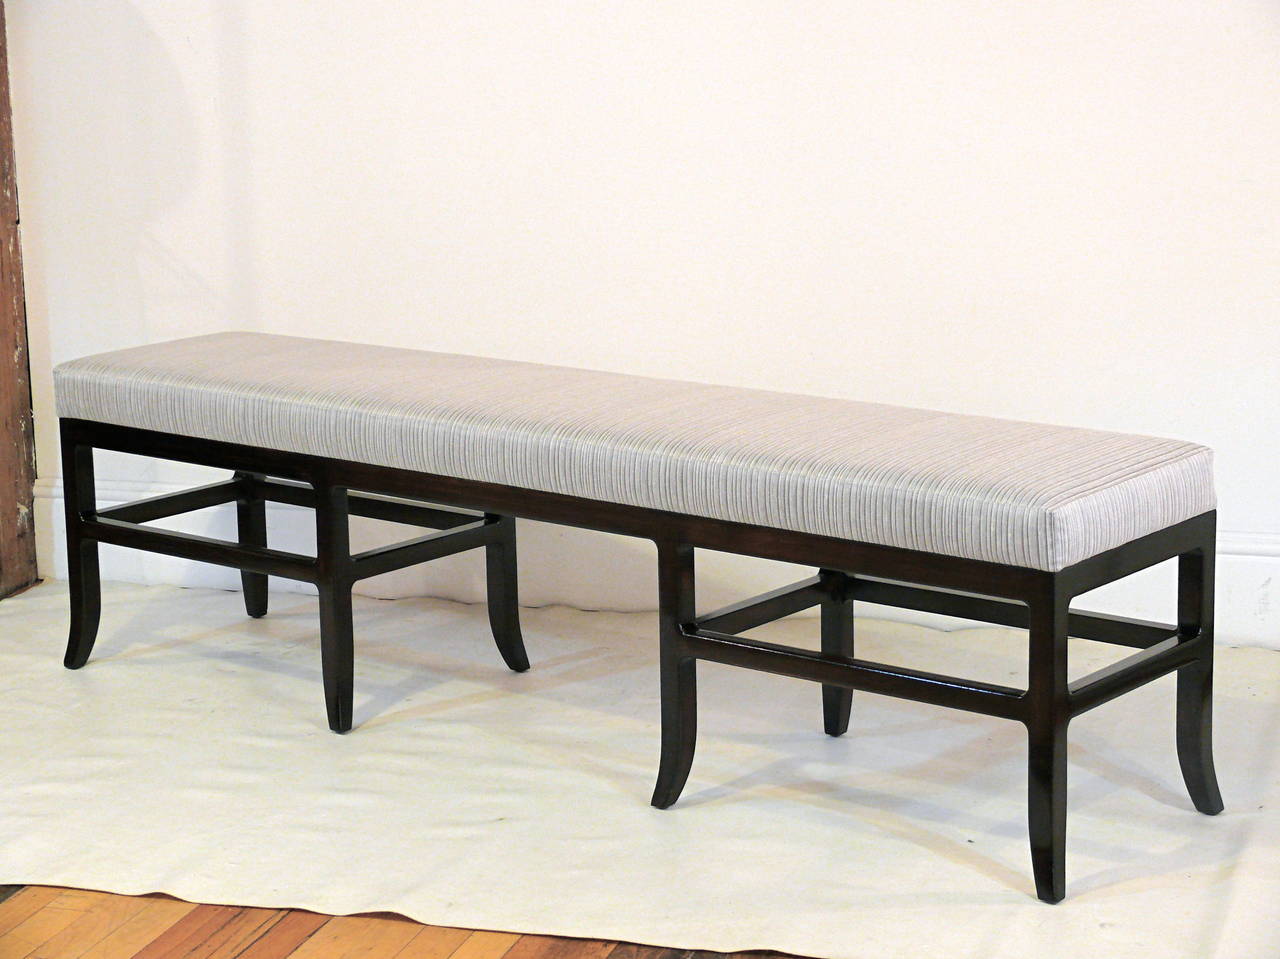 Elegant Mid-Century bench in the manner of James Mont with eight sculpted splayed legs and beautiful base stretchers, refinished in a high gloss espresso and upholstered in a Robert Allen silver grey tucked fabric.